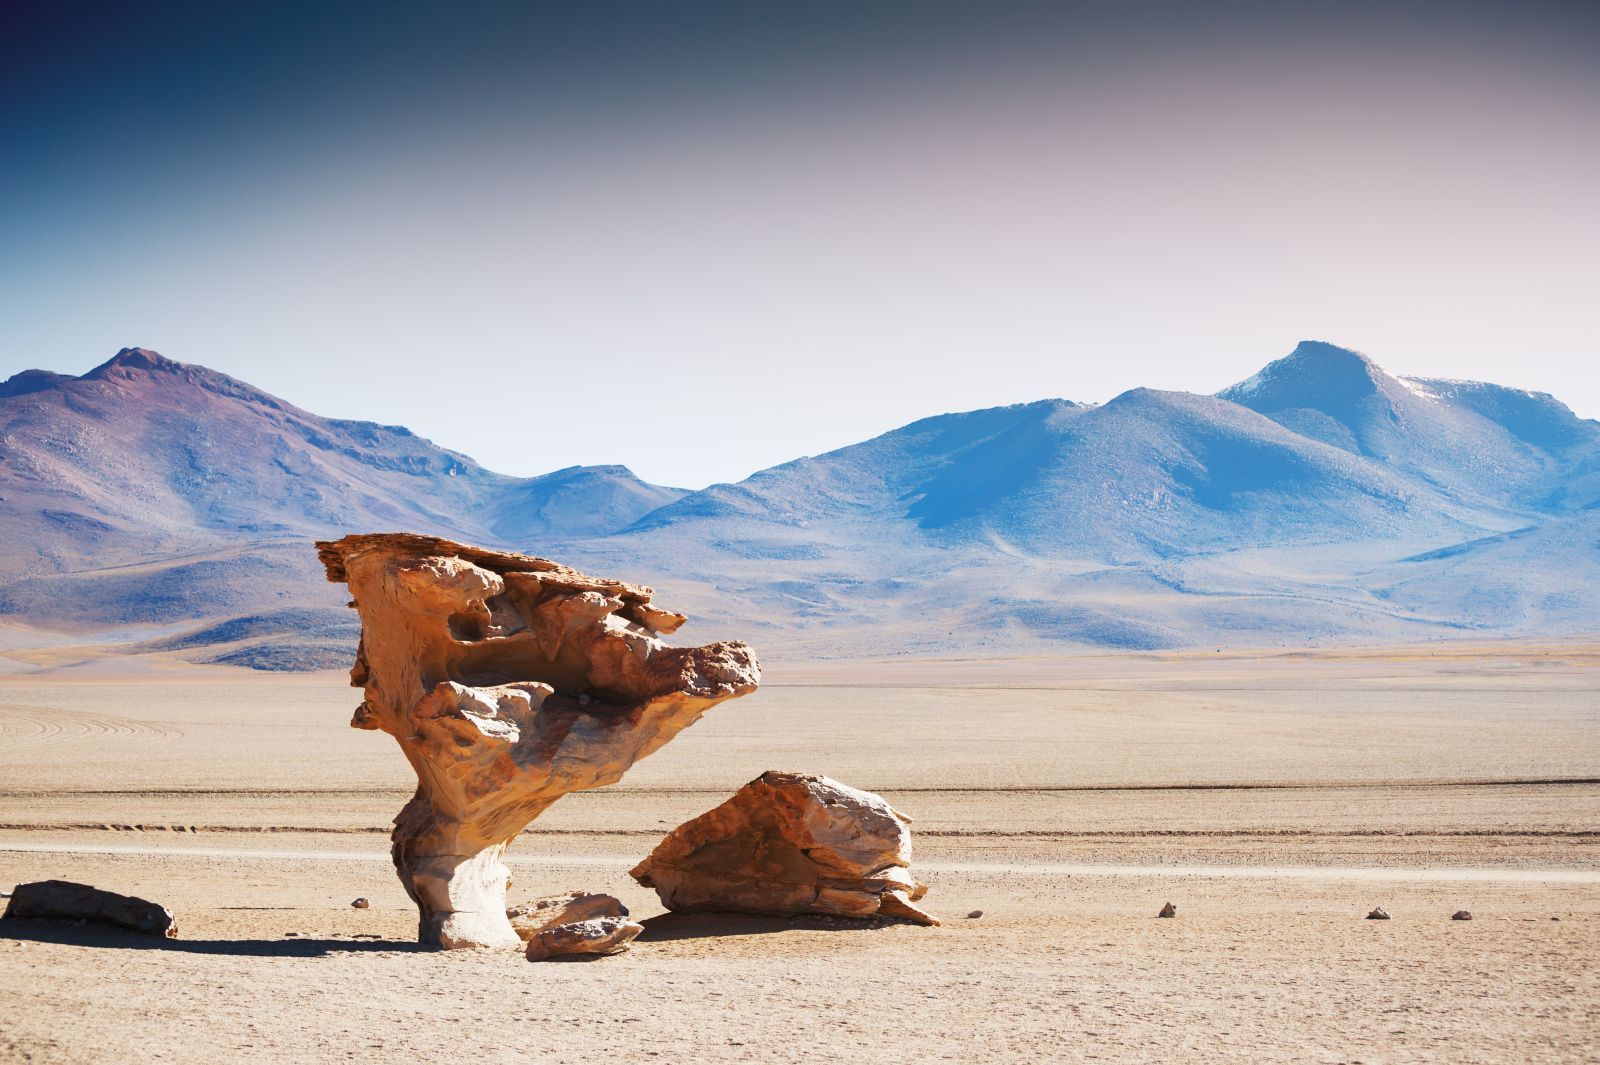 A stone tree rock formation in the Eduardo Avaroa Andean Fauna National Reserve of Sur Lípez Province, Bolivia.